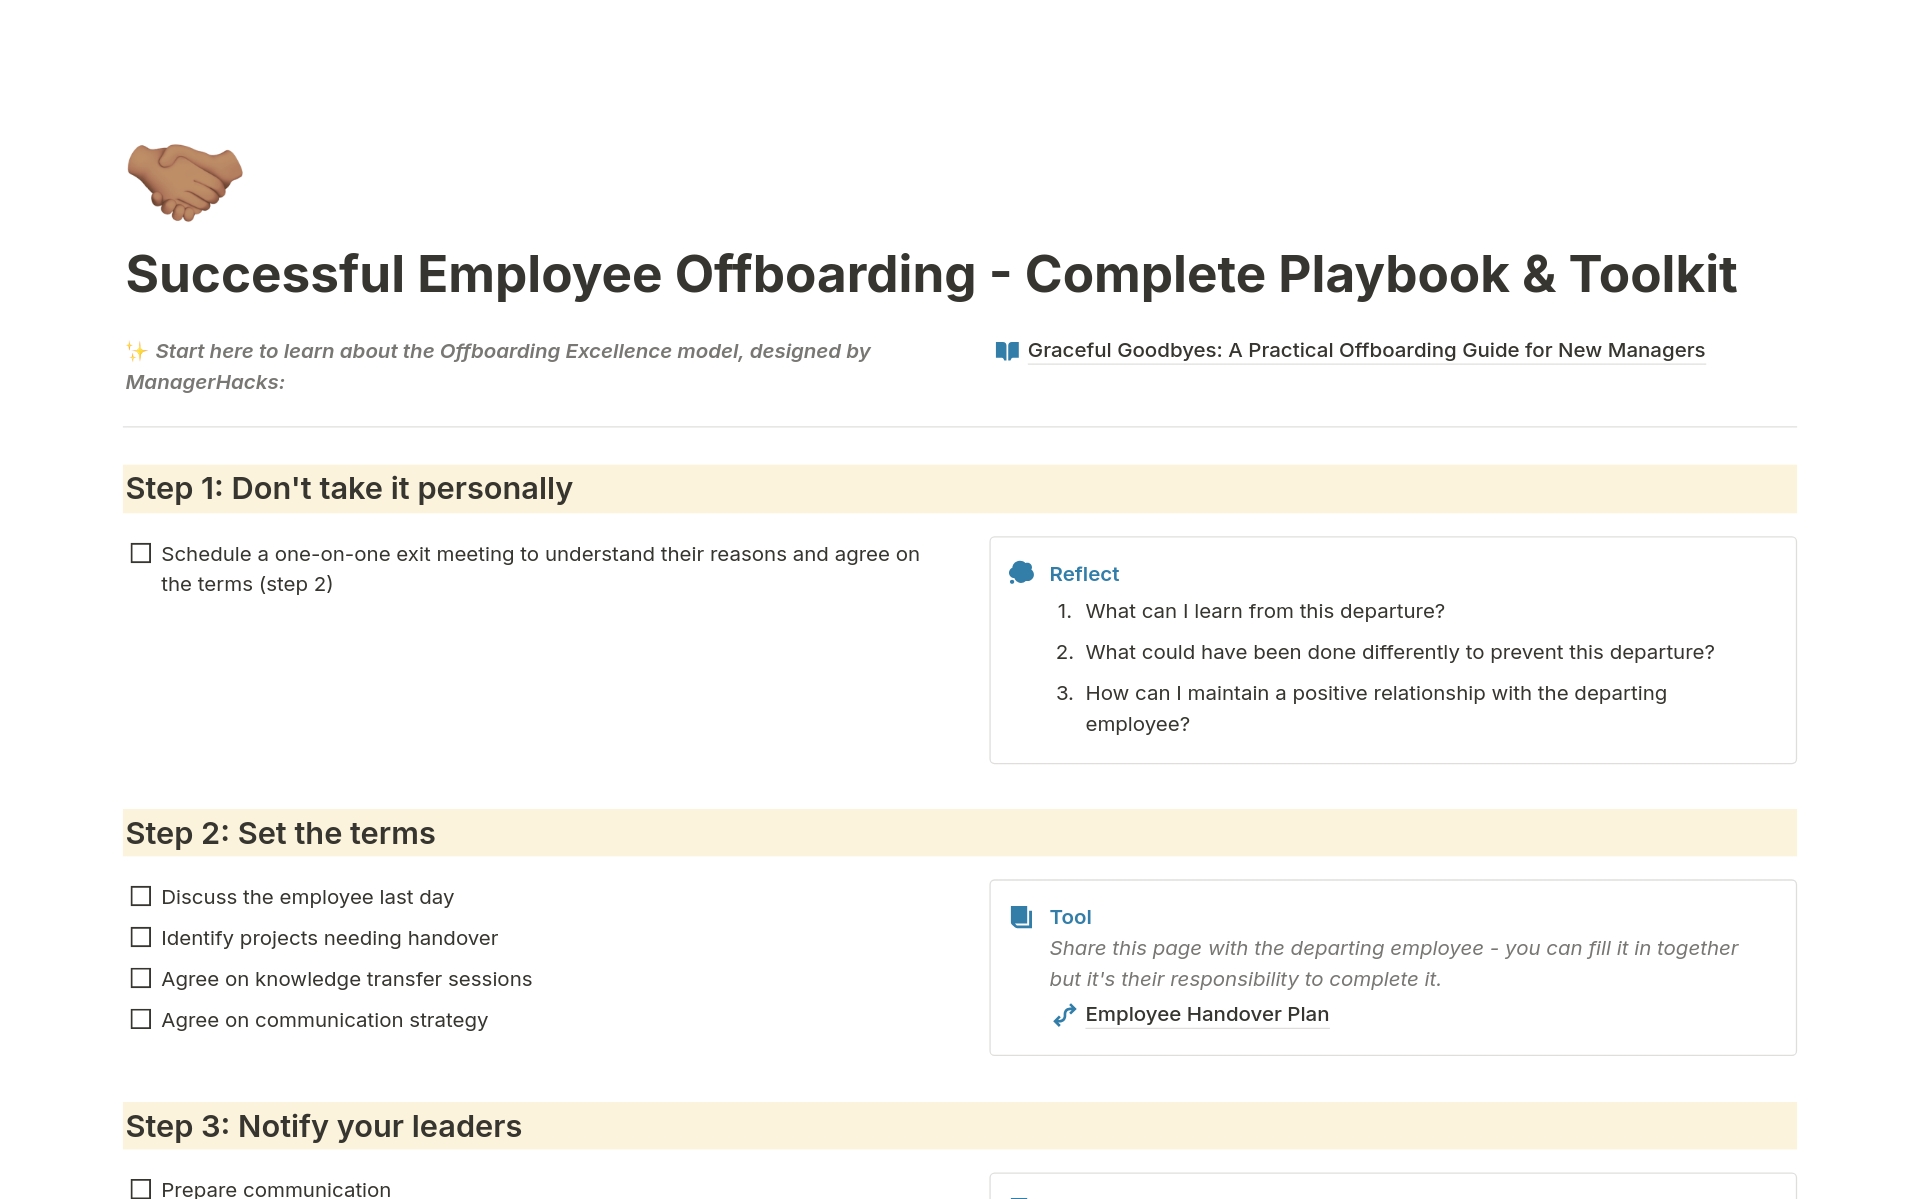 This template guides managers through the employee offboarding process, ensuring a thoughtful and comprehensive approach to managing an employee's departure.